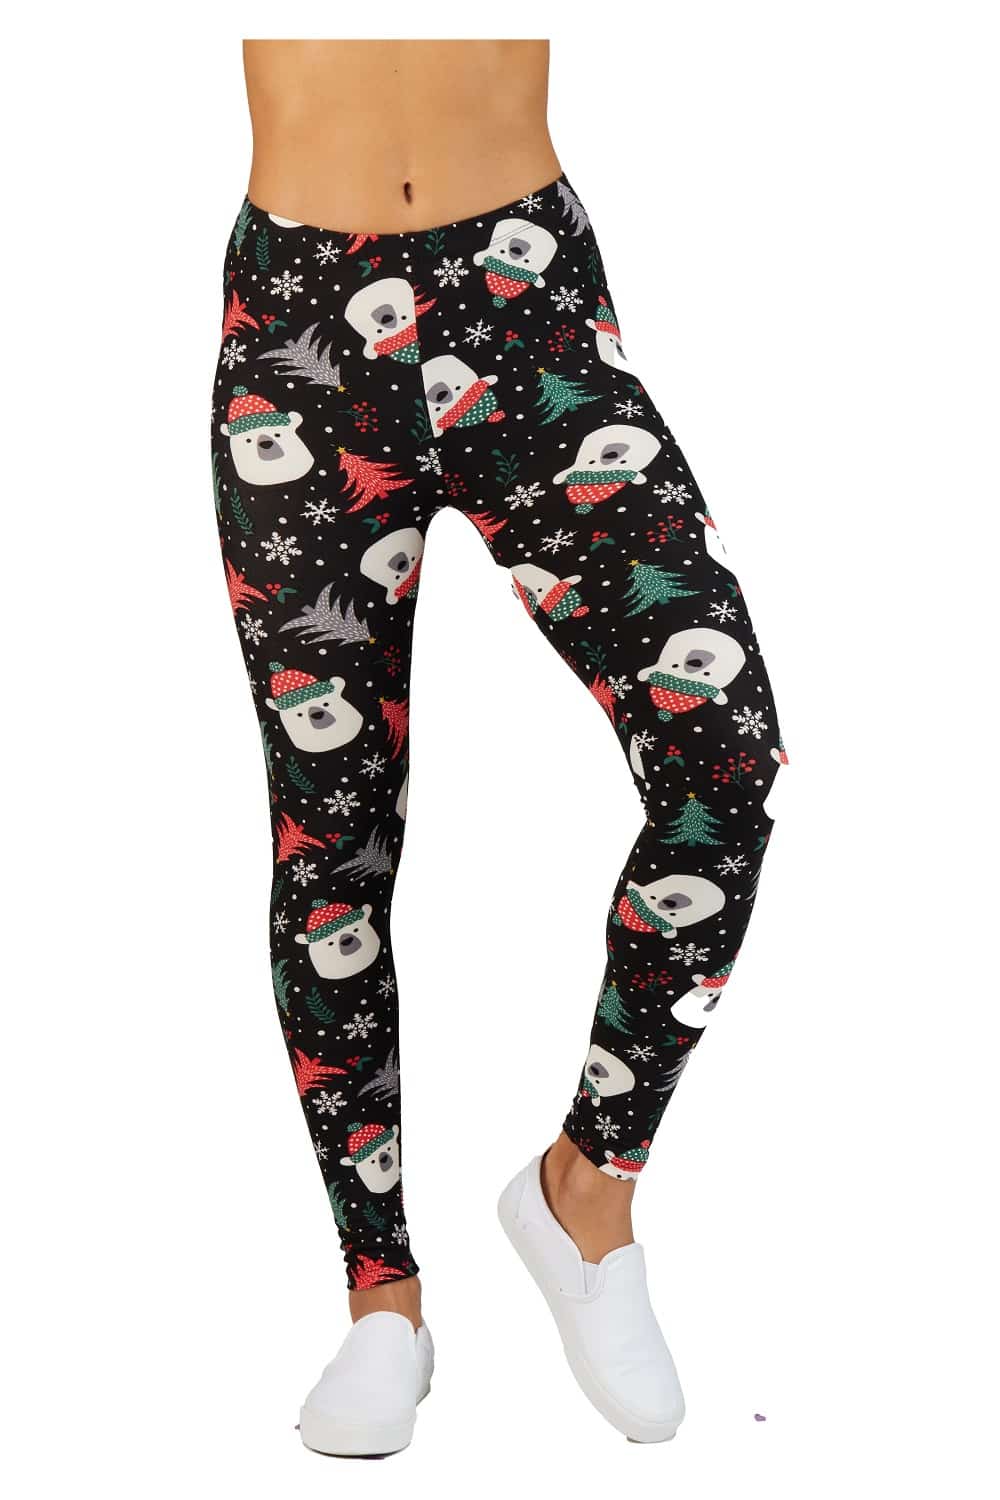 Christmas Print Ankle Leggings 1 inch Elastic Waisted with